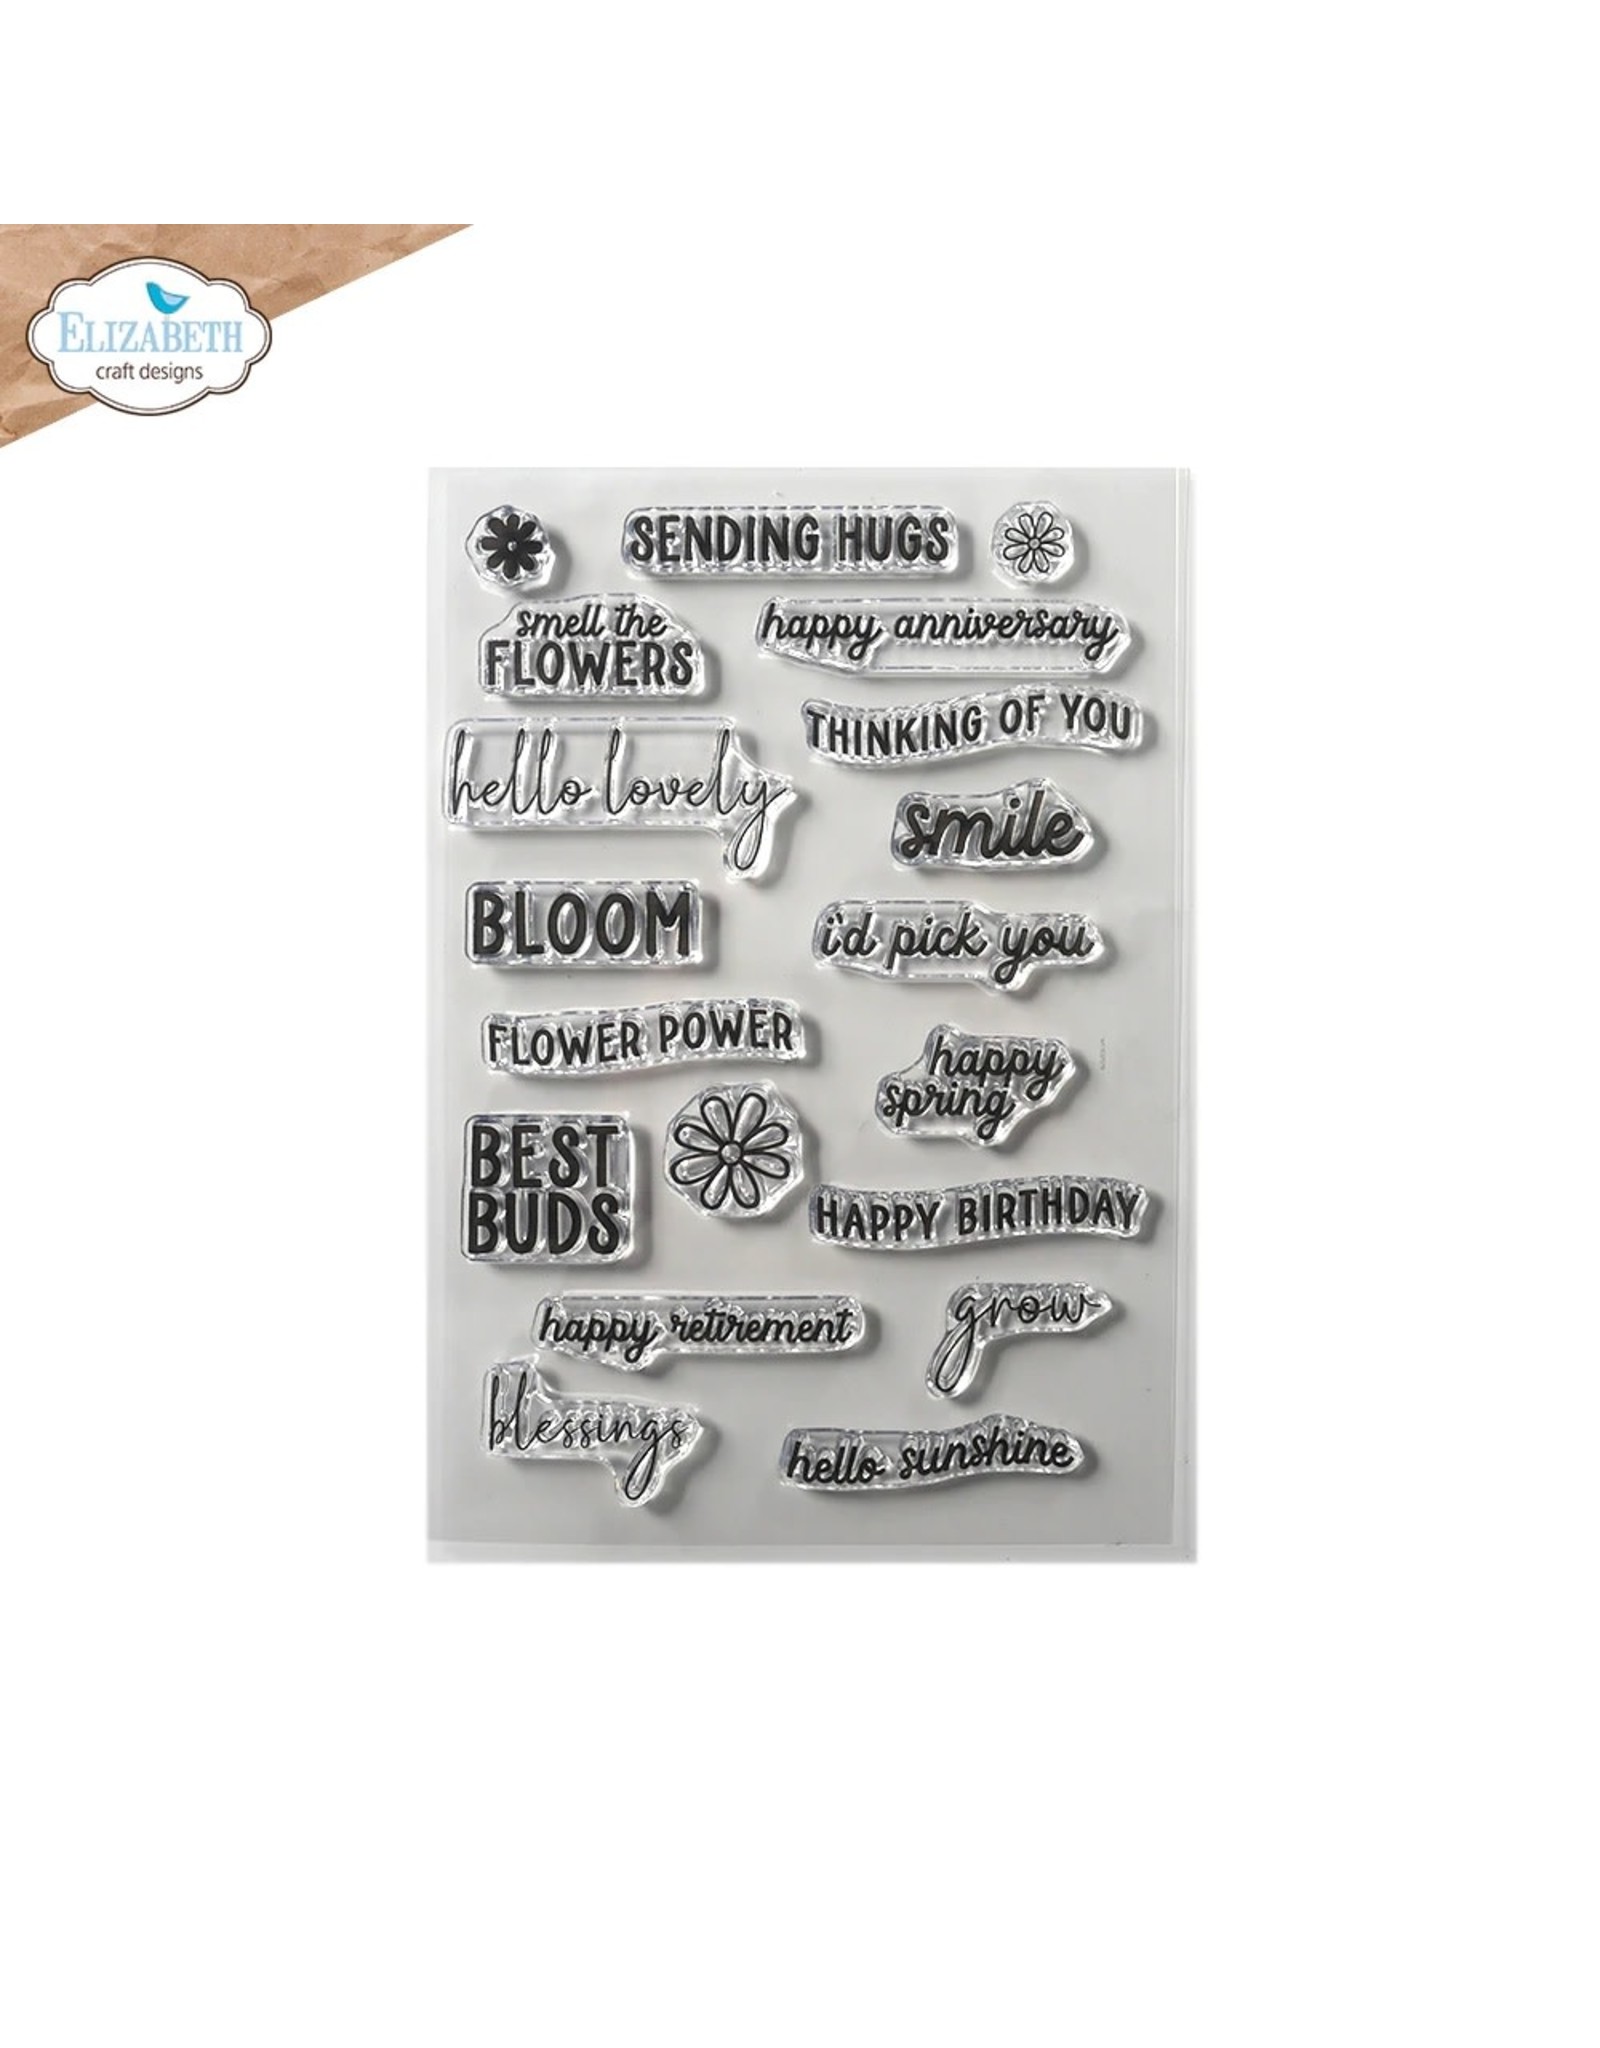 ELIZABETH CRAFT DESIGNS ELIZABETH CRAFT DESIGNS SMELL THE FLOWERS CLEAR STAMP SET